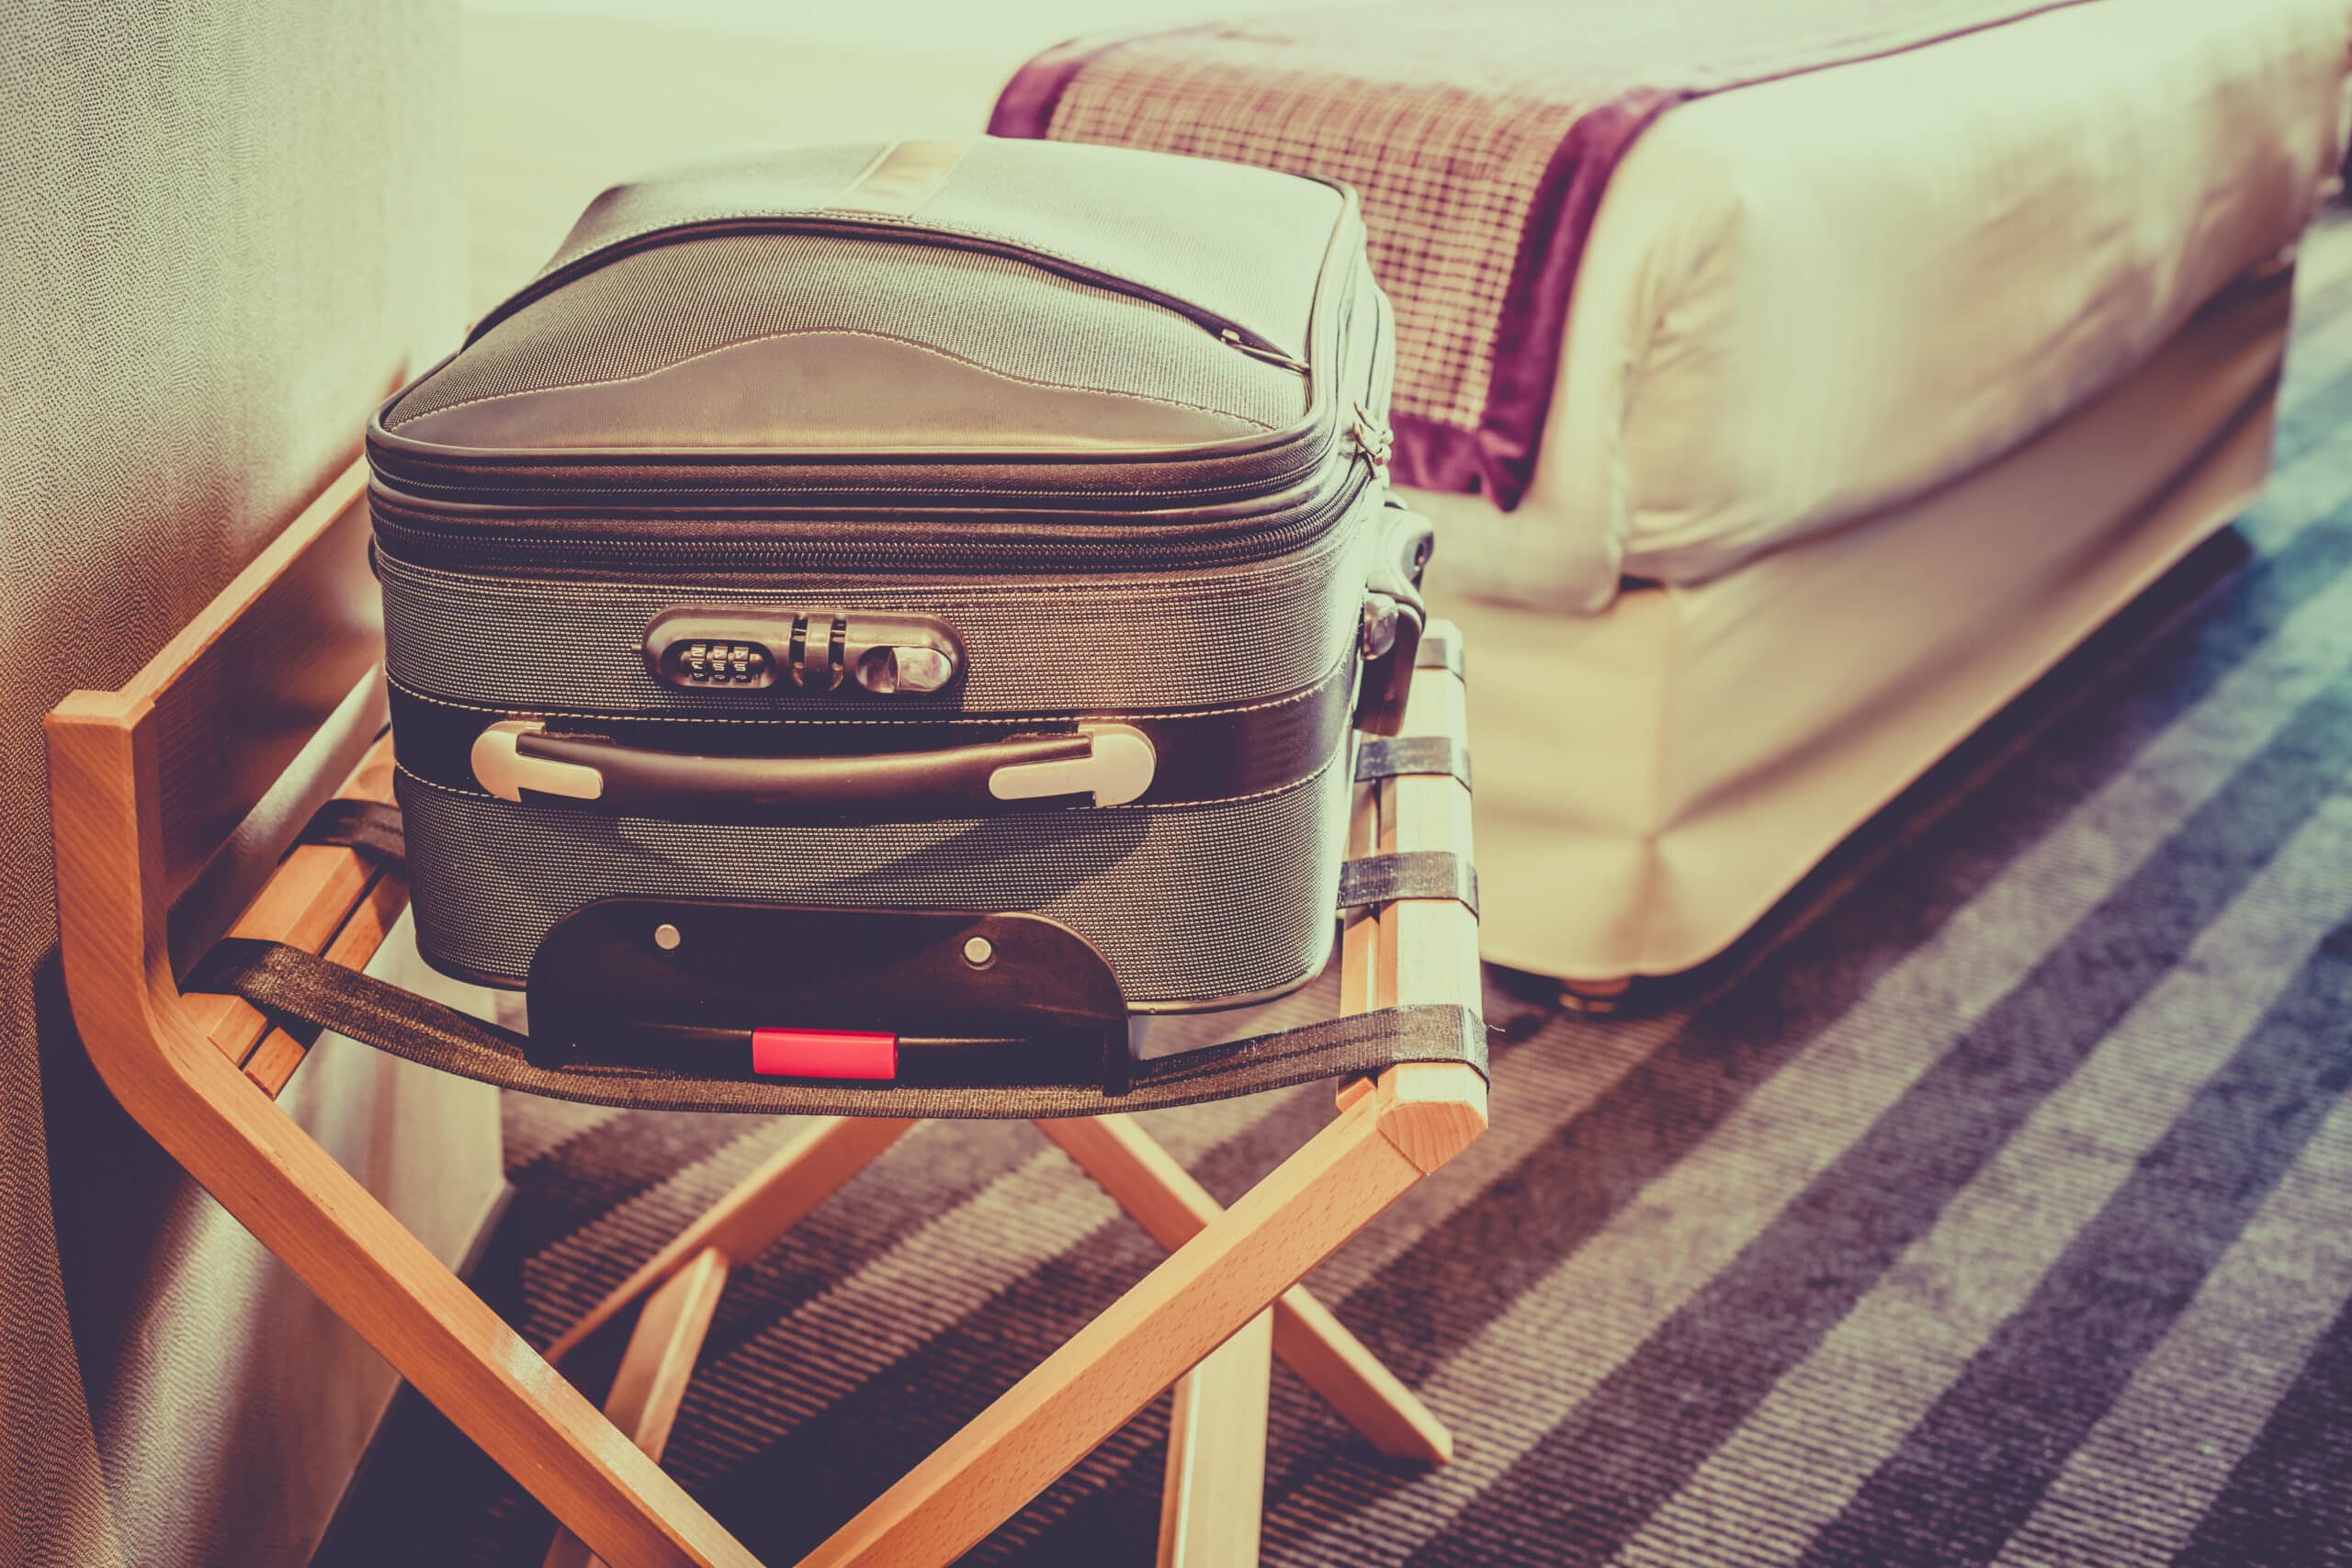 Suitcase on the luggage rack in a hotel room with a bed in the background.